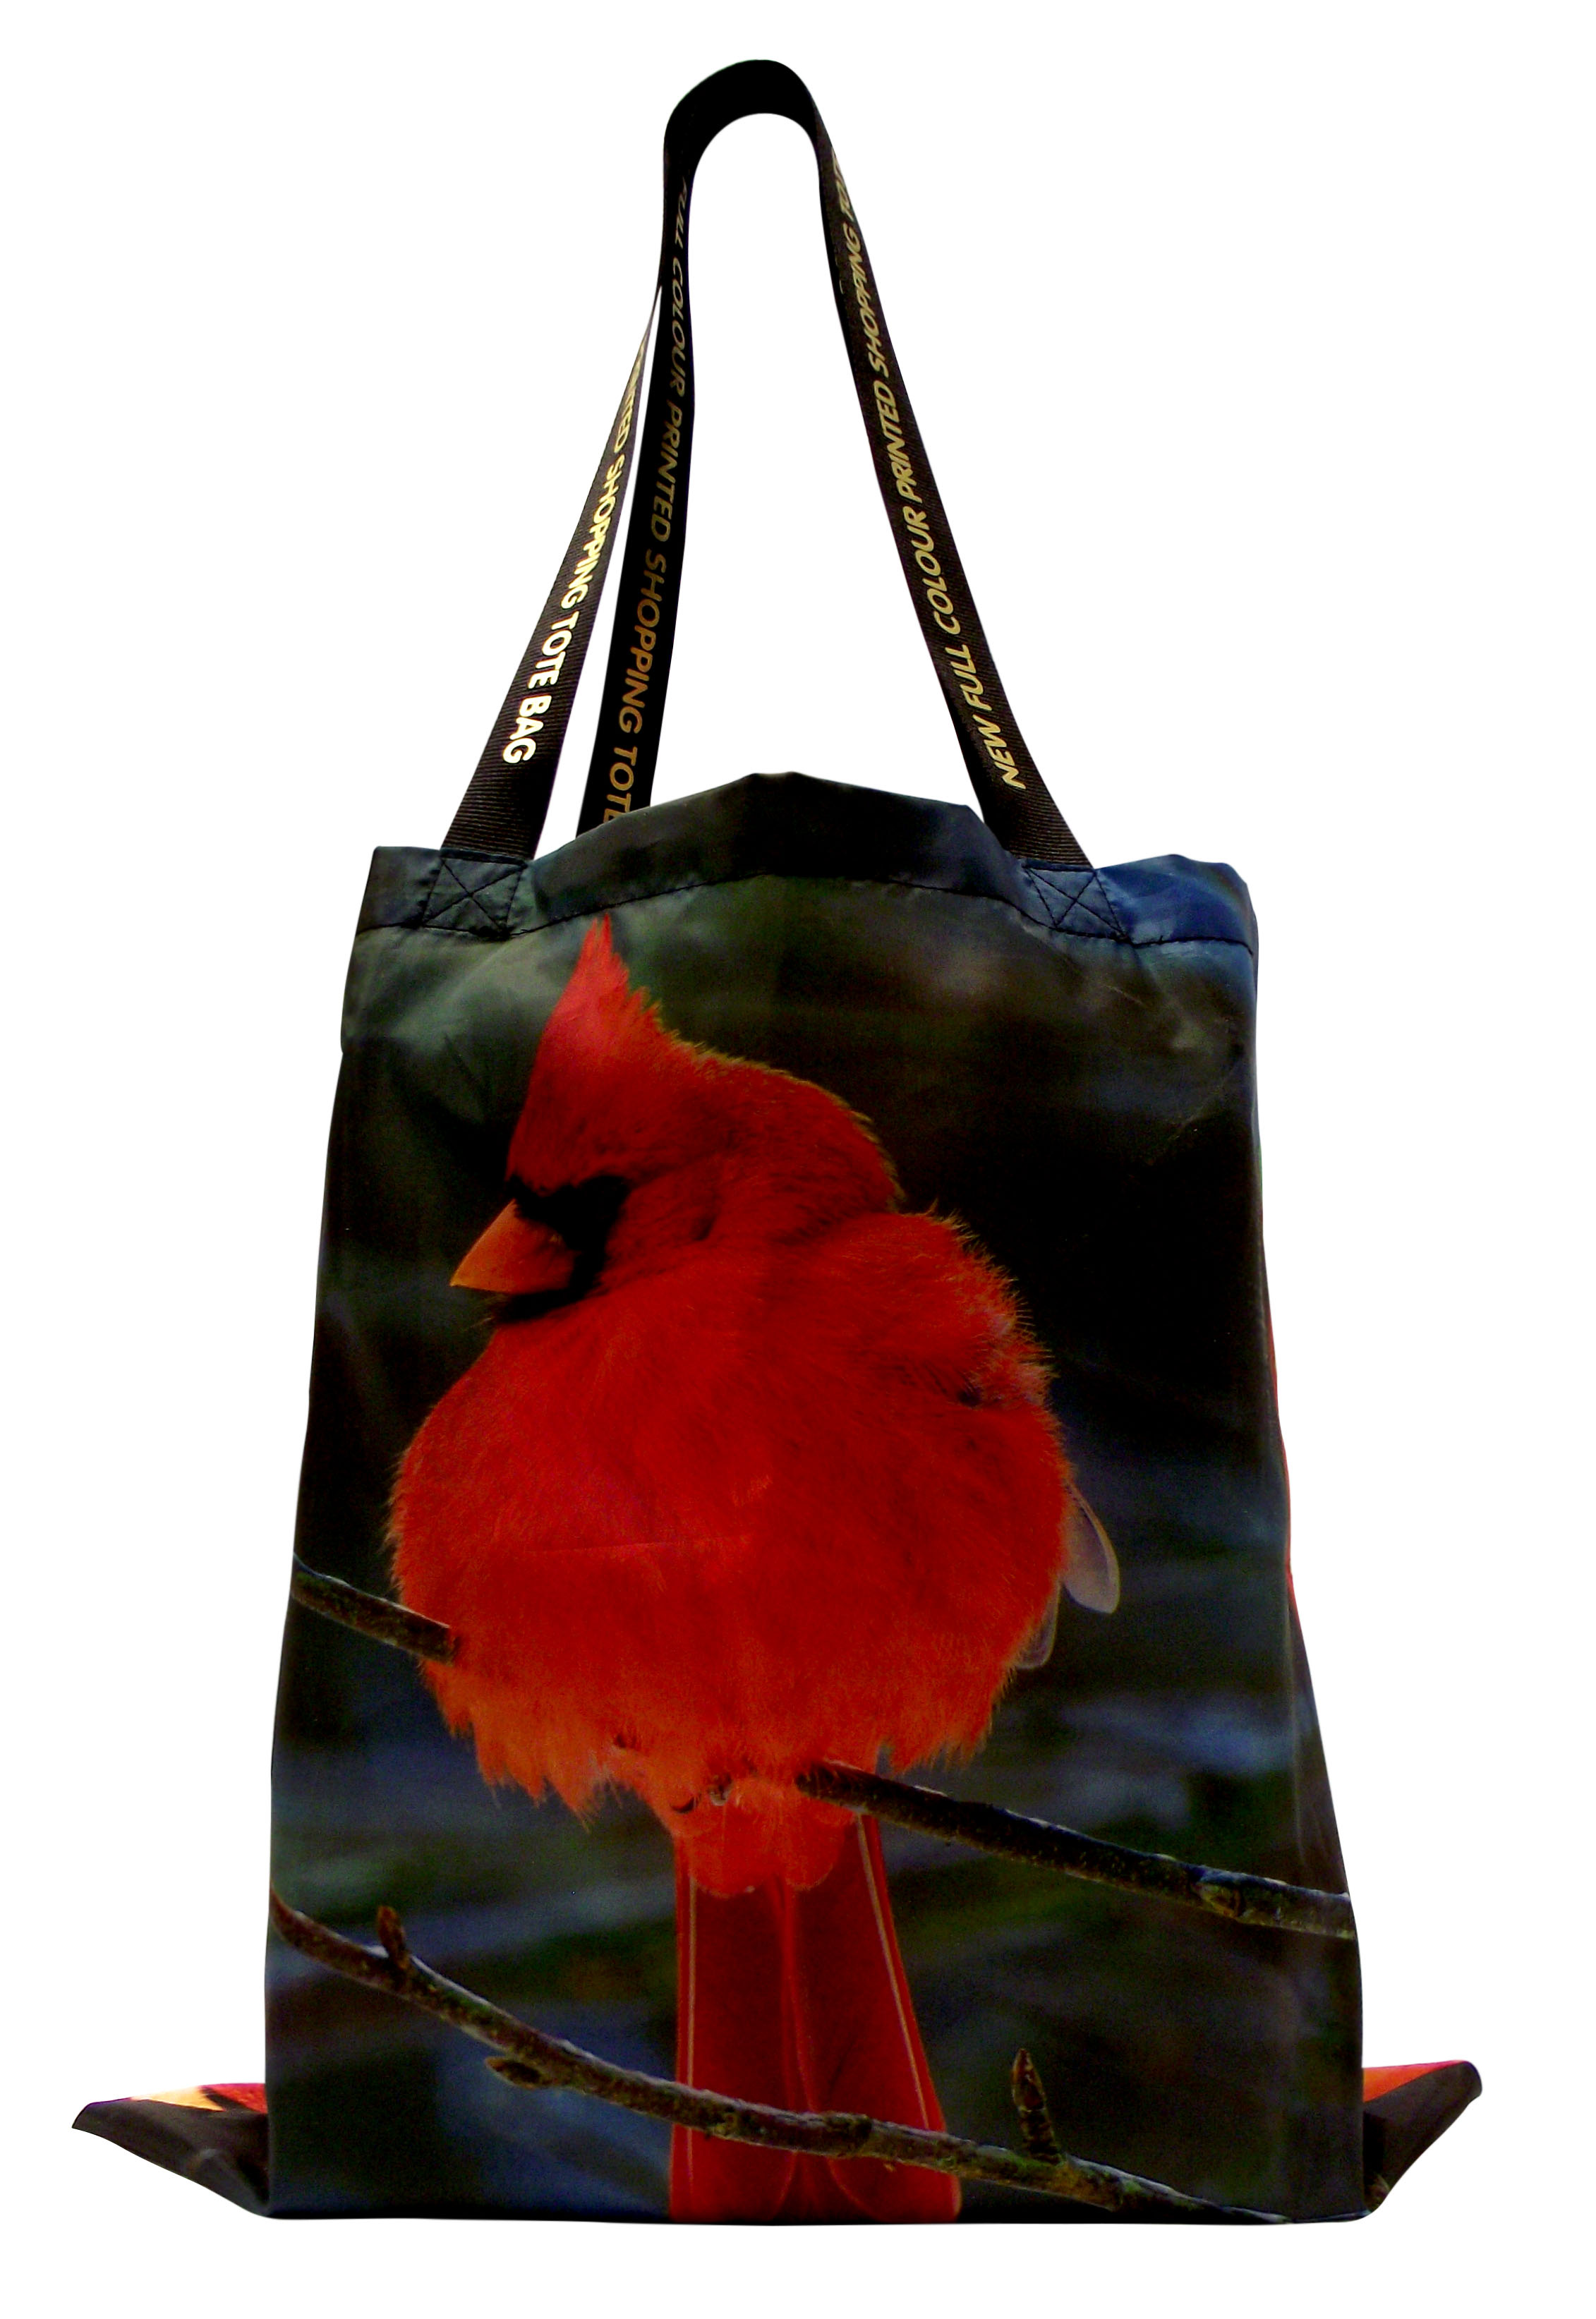 Full Colour Tote Bags - Buy Promotional Products UK | Corporate Gifts | Promotional Items ...